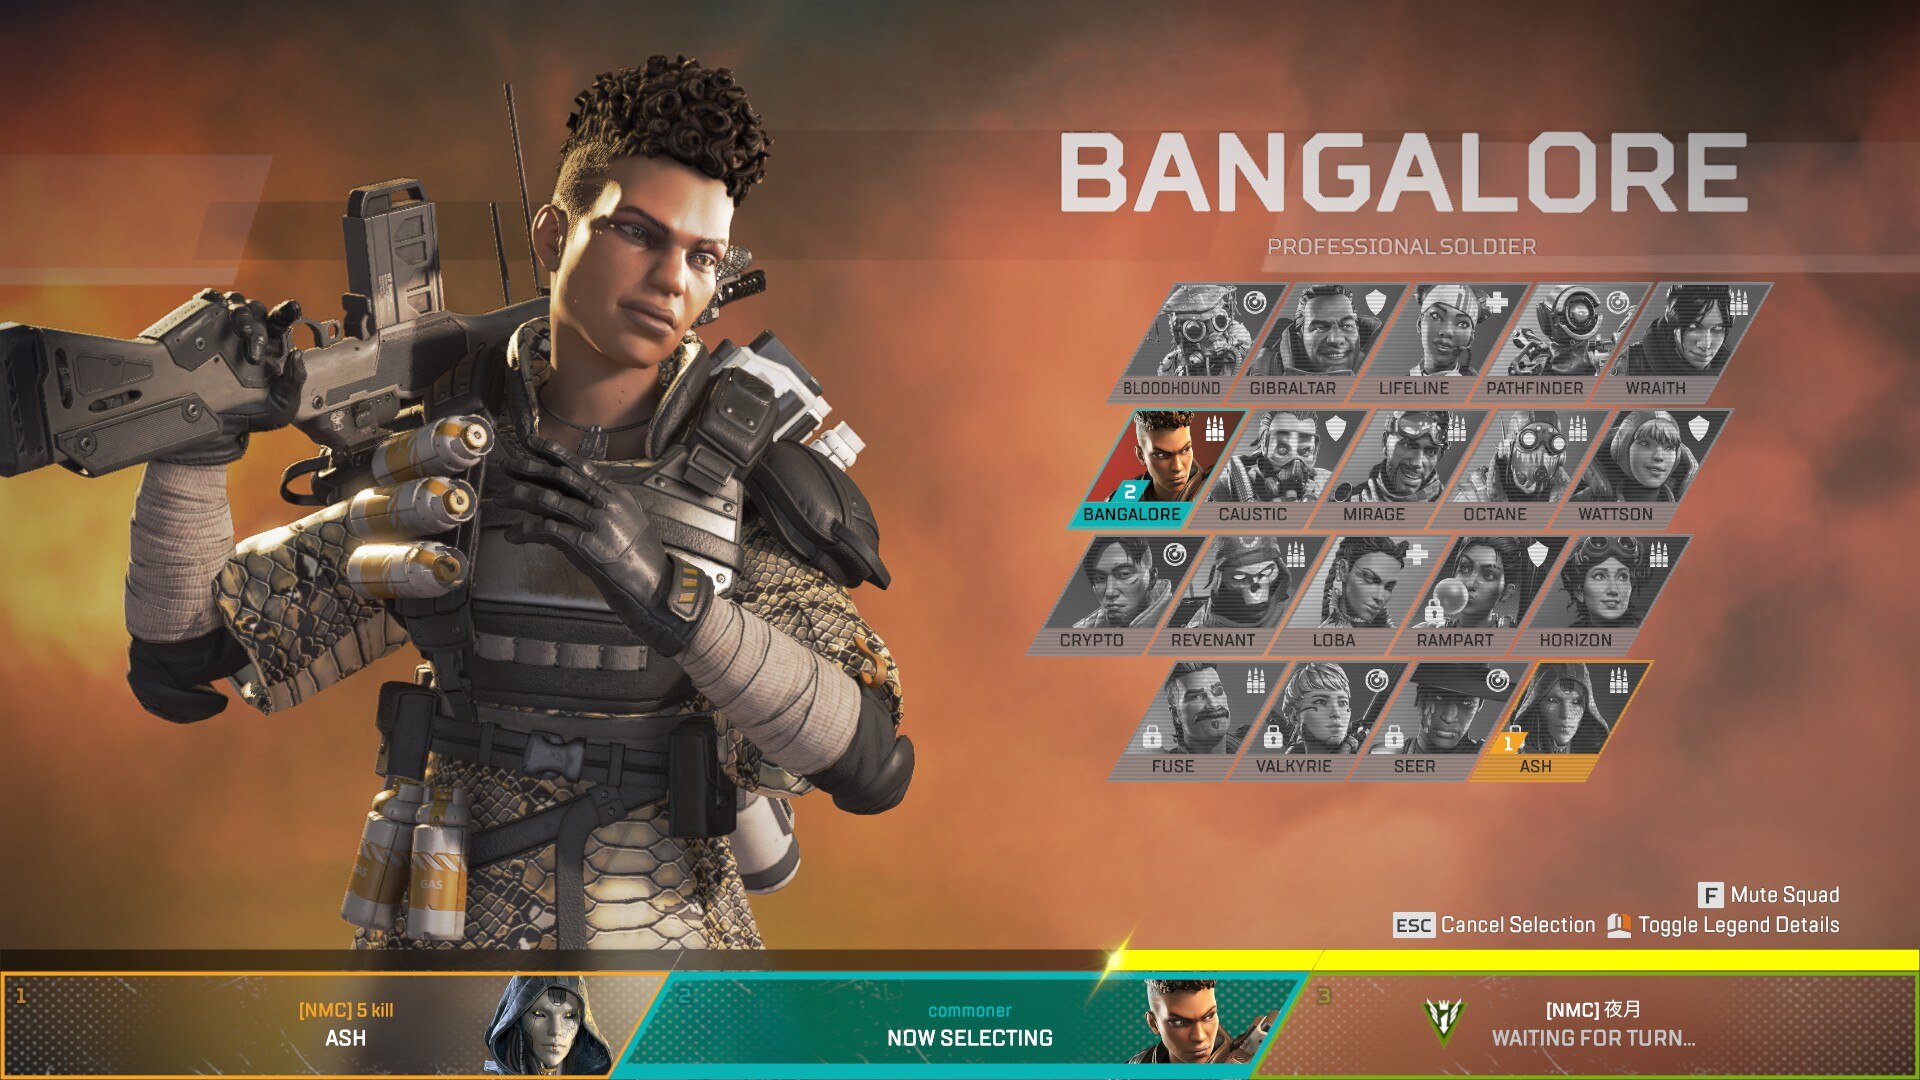 How to Play as Bangalore in Apex Legends (Season 11)